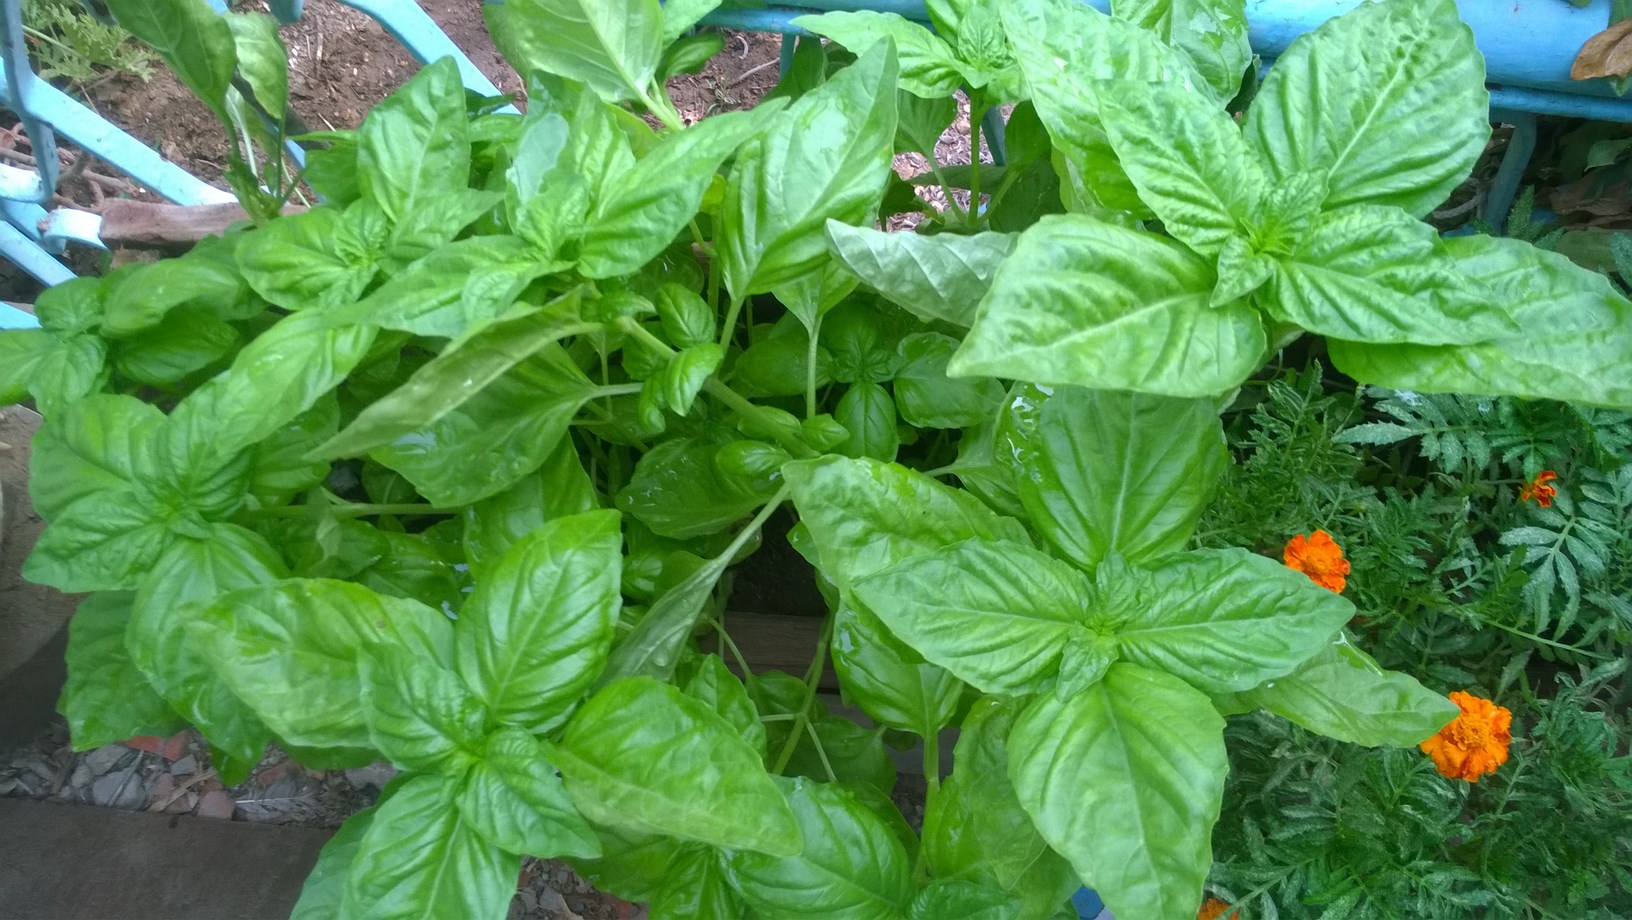 Basil is grown for its fragrant tasty leaves